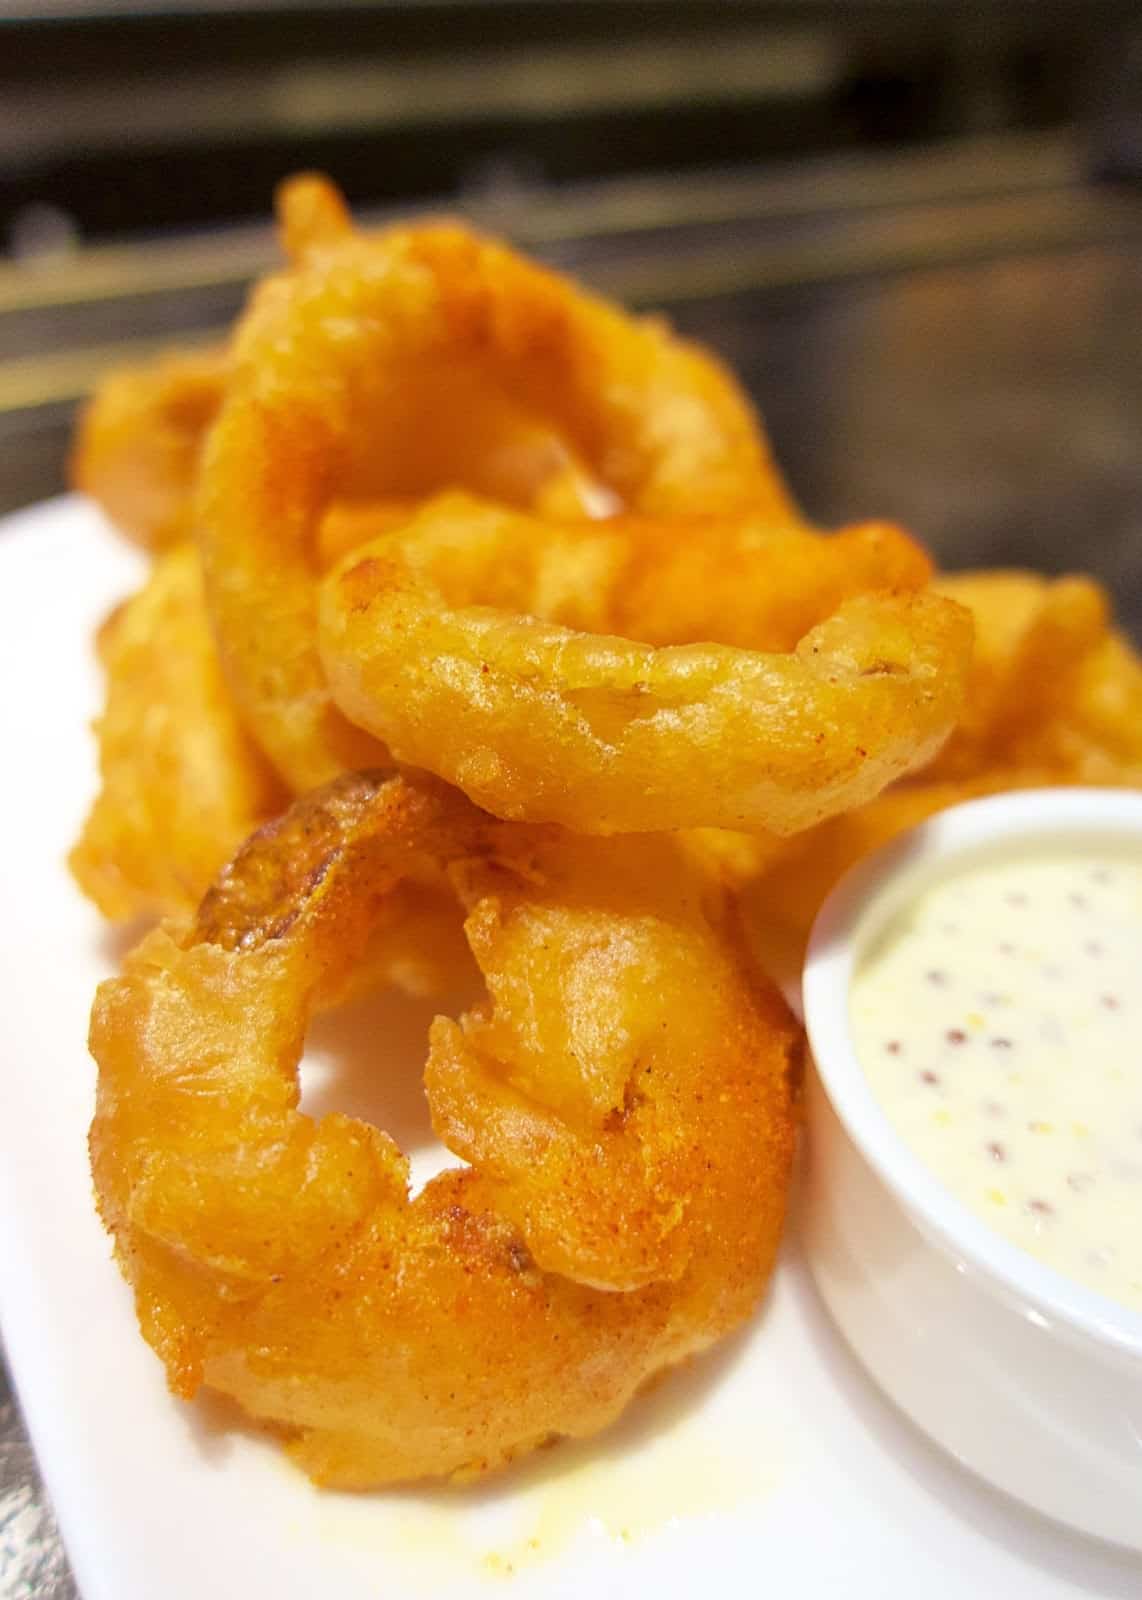 Tom Colicchio's Heritage Steak - Spicy Onion Rings